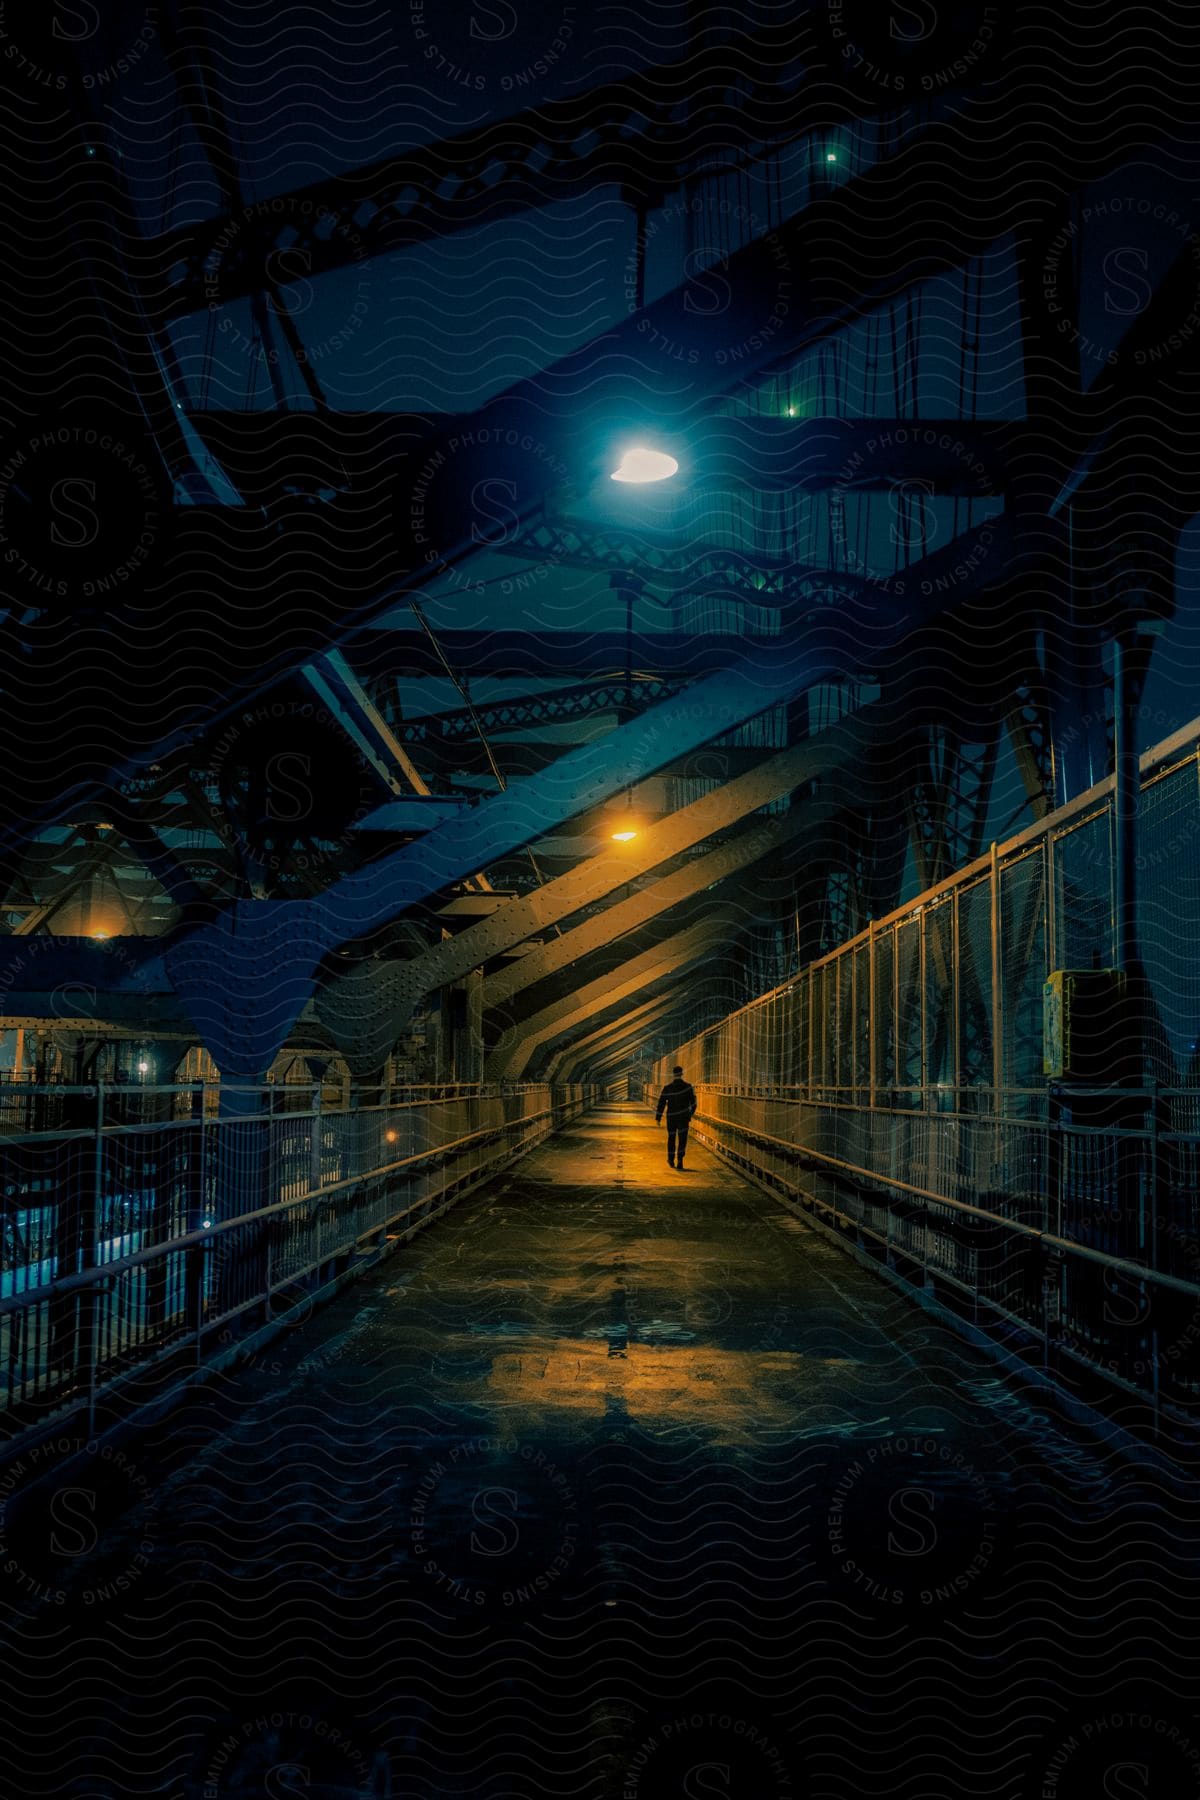 Silhouette of a person walking on a steel bridge at night in new york